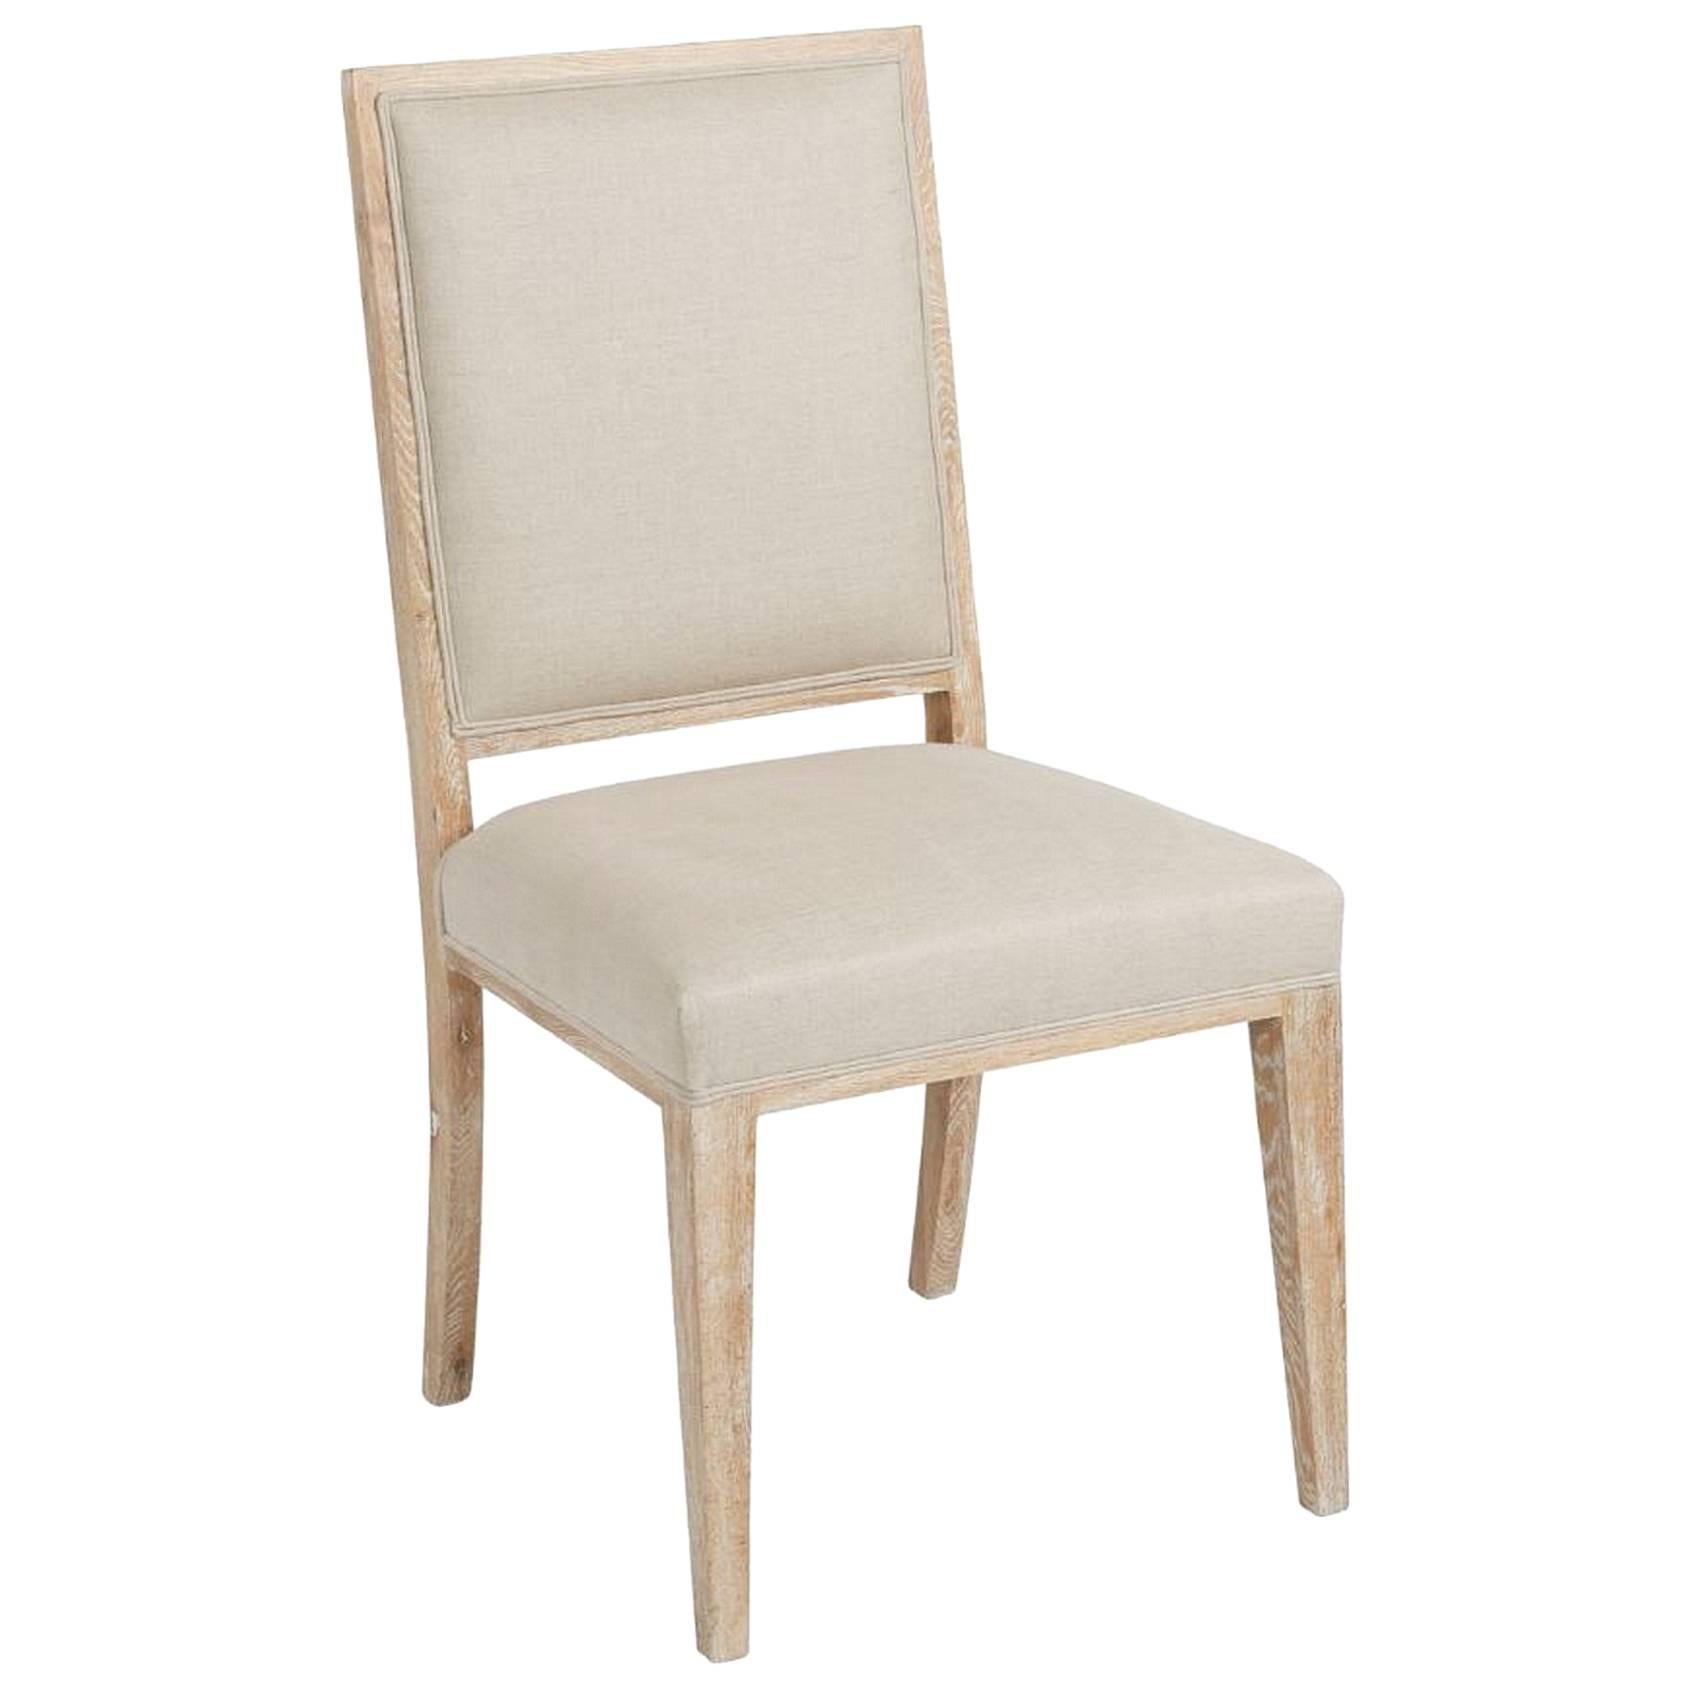 Upholstered White Wash Dining Chair For Sale